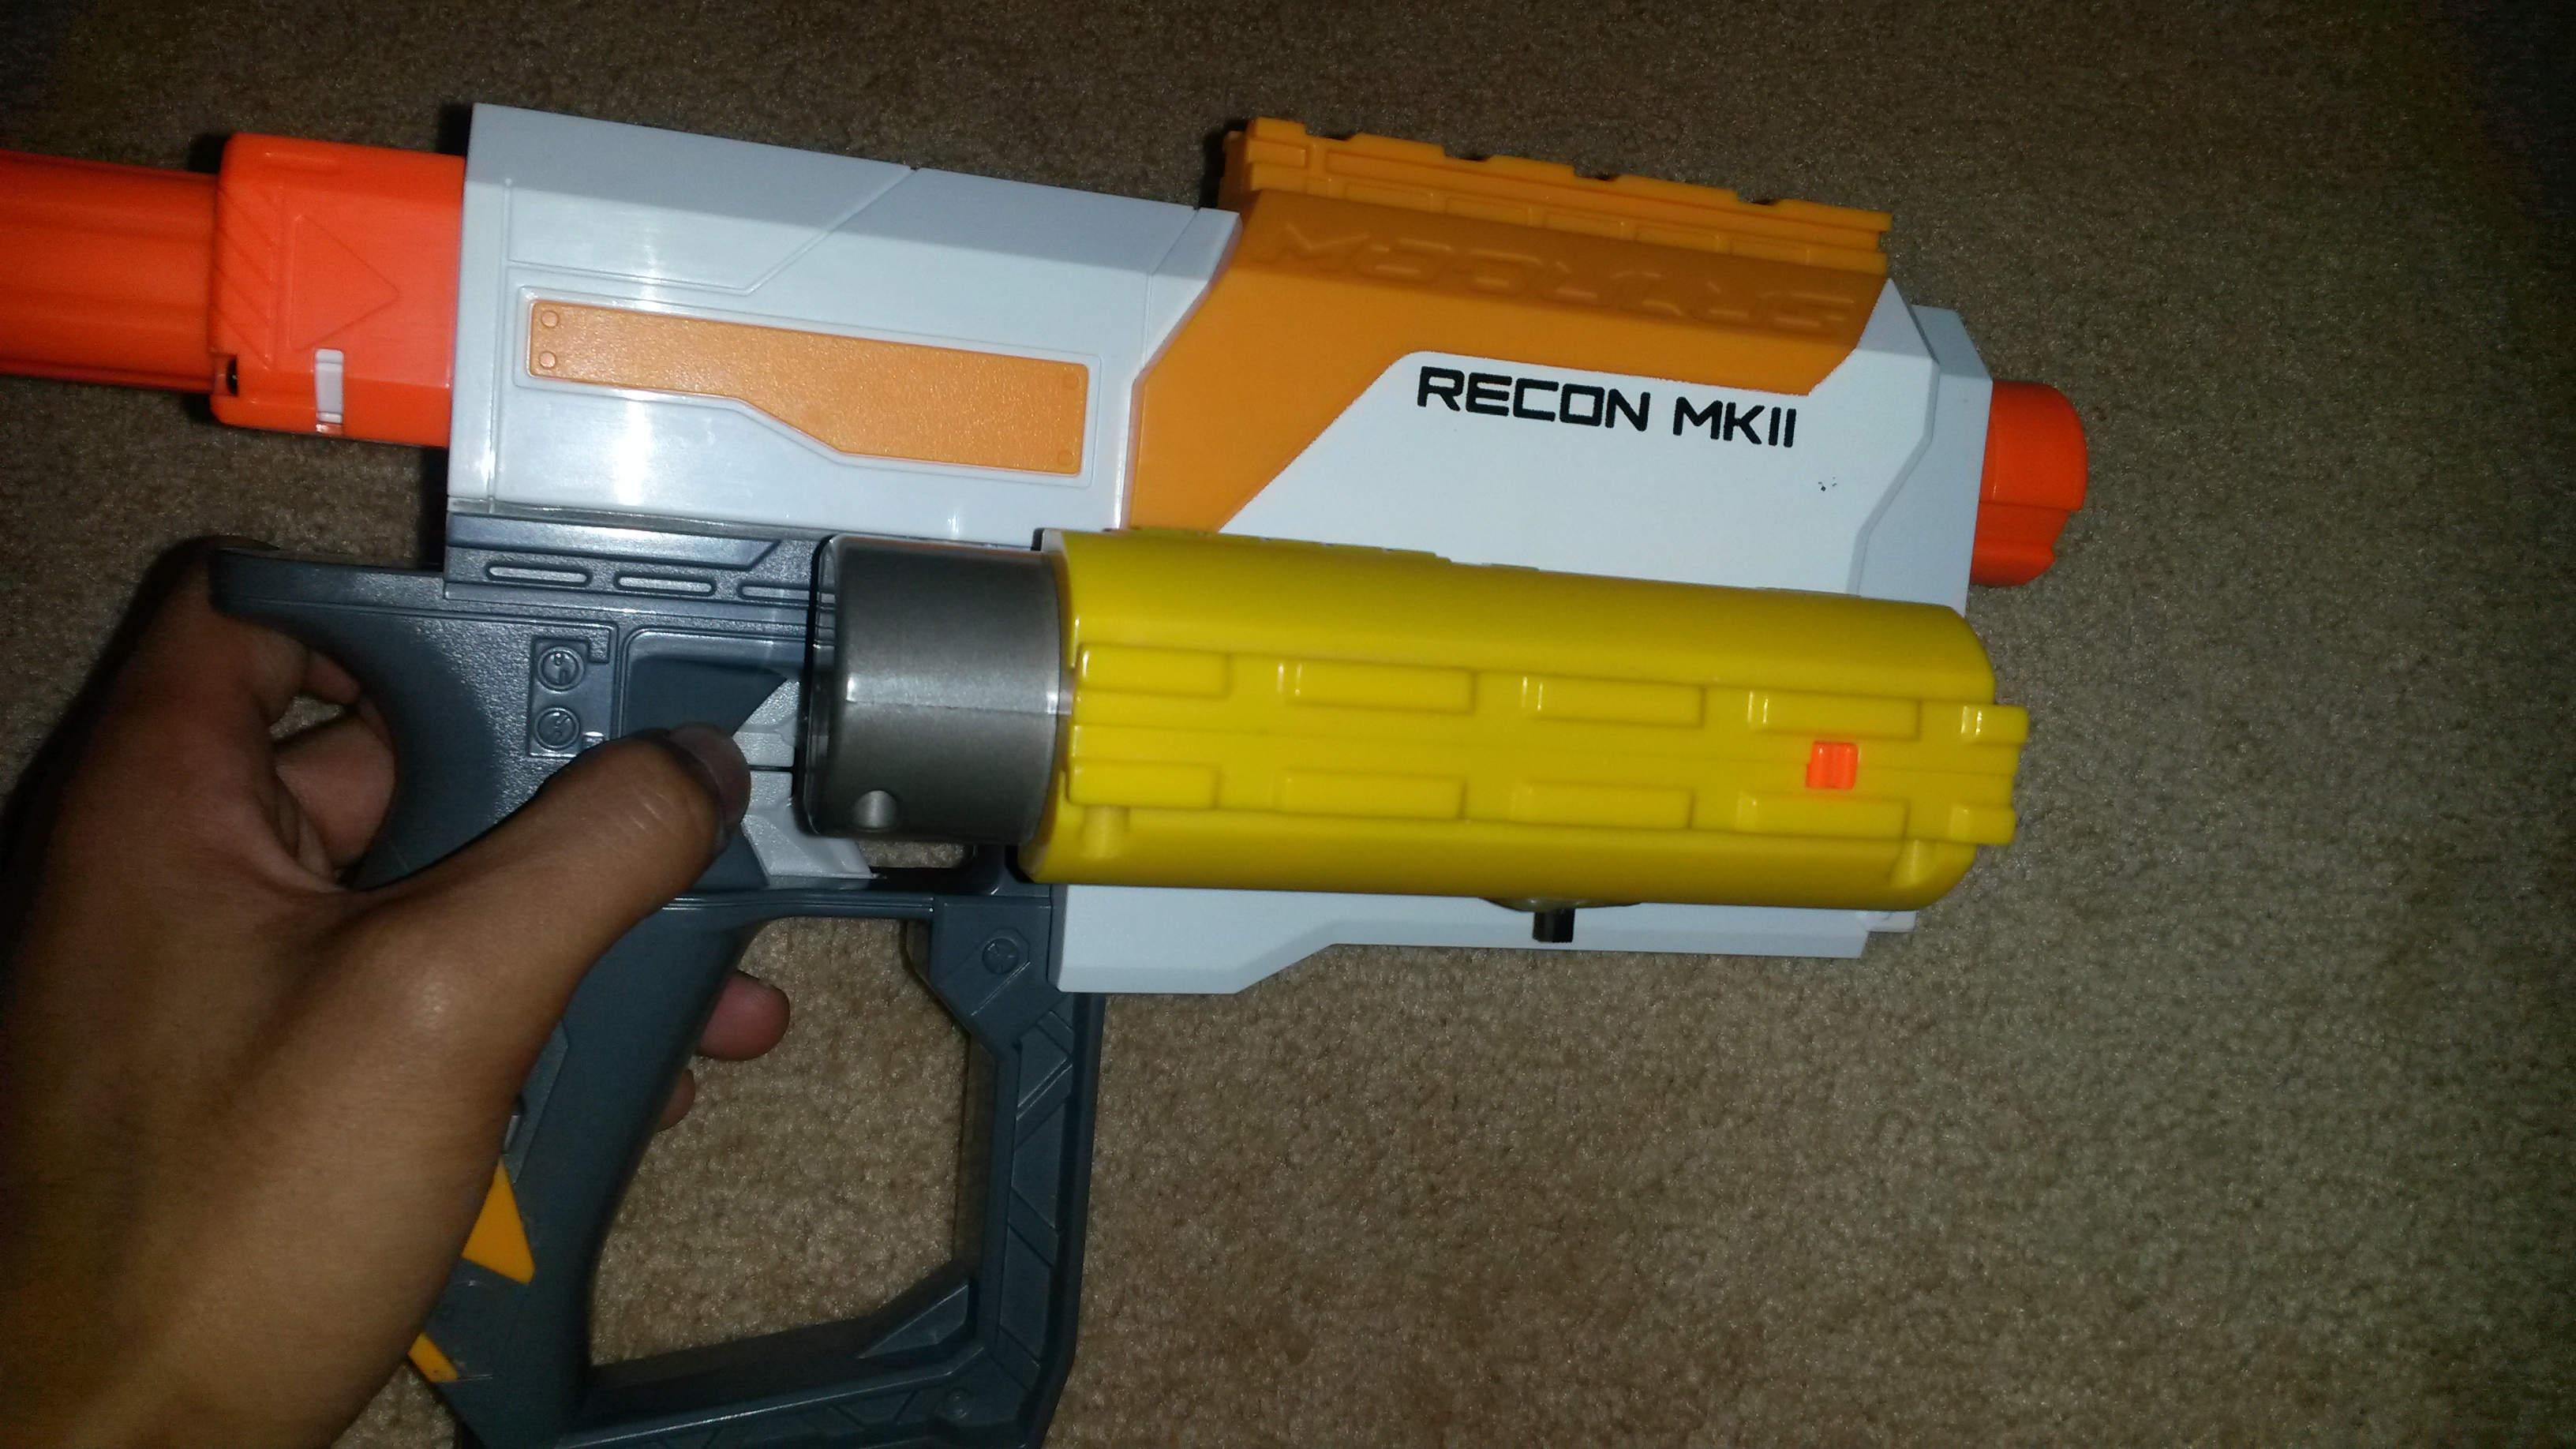 Review: Nerf Modulus Recon MkII (21m grey trigger) | Hub